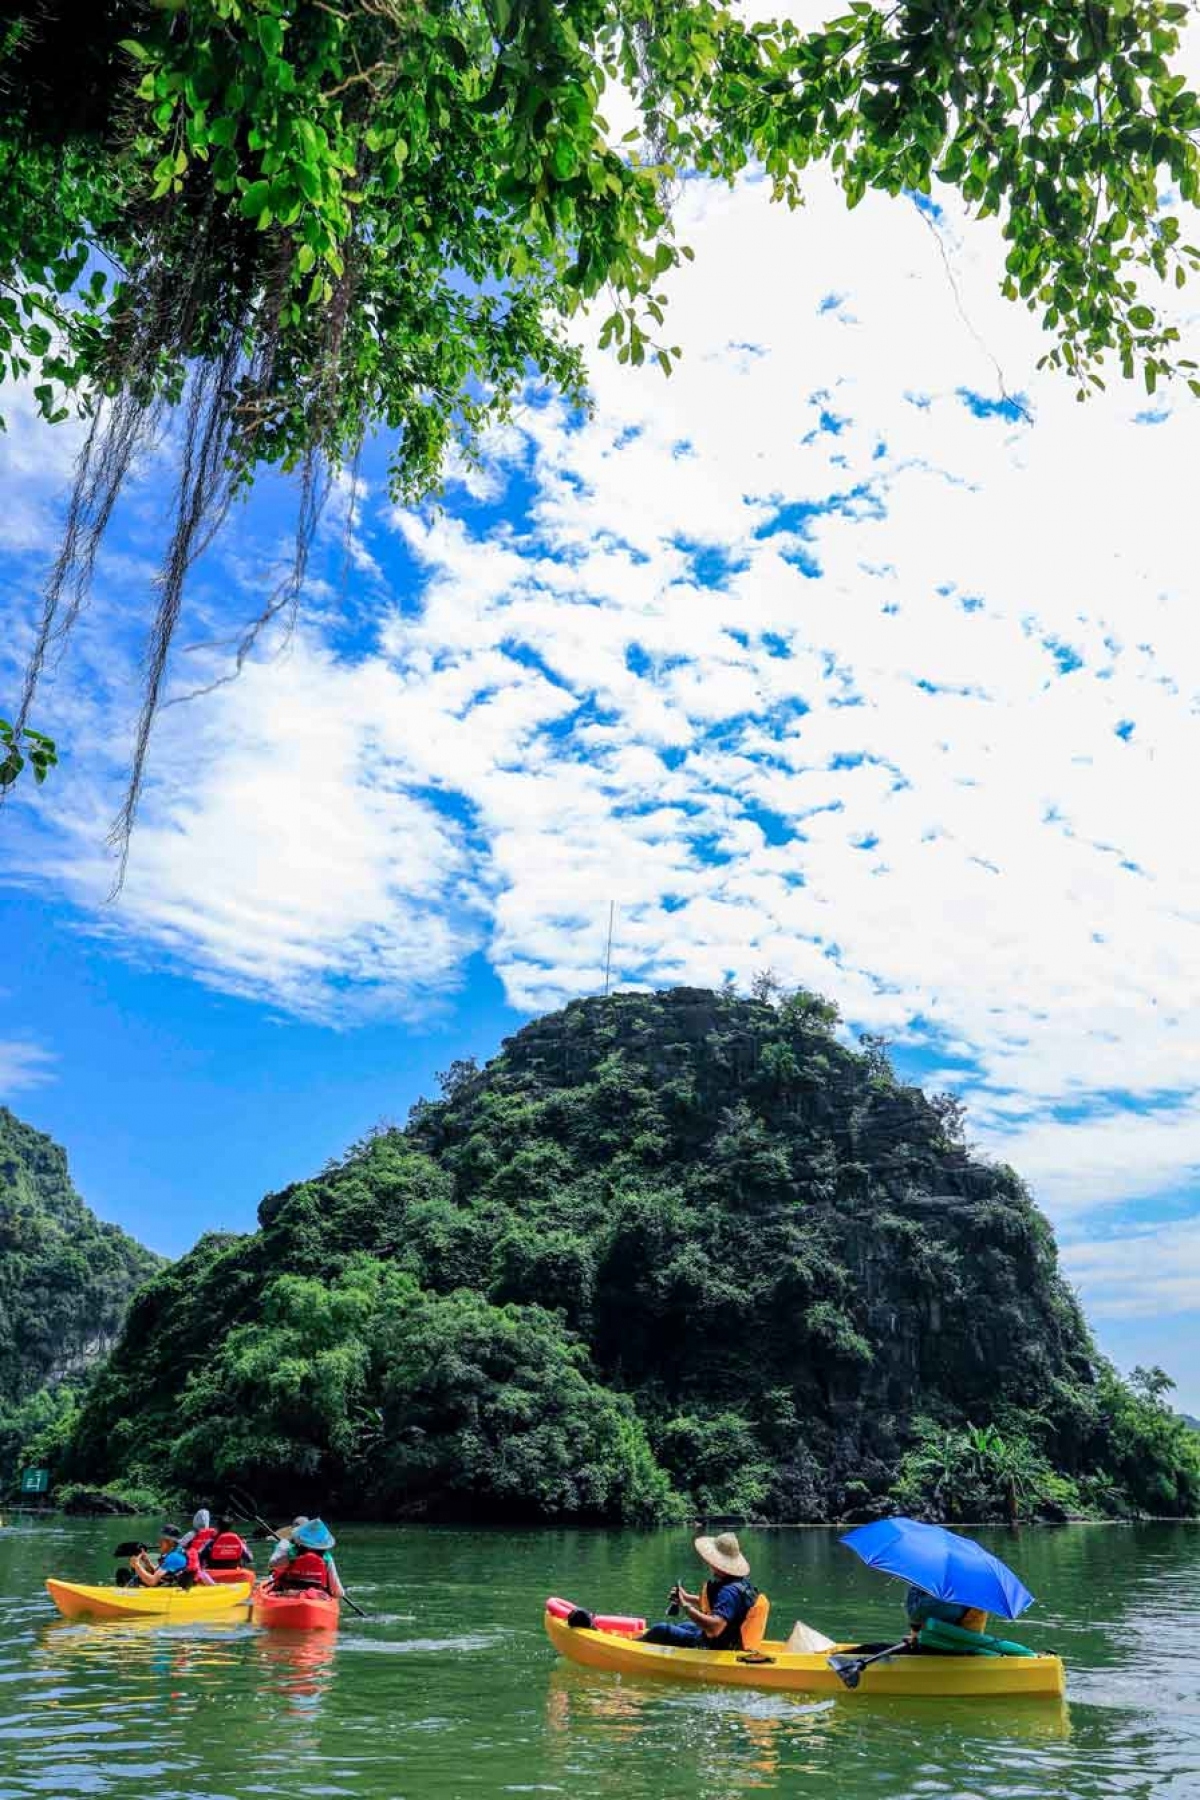 The Trang An Tourism Site Management Board has recently launched a new kayaking service aimed at attracting more visitors. These new services include allowing tourists to take boats to visit caves and temples situated around the site.